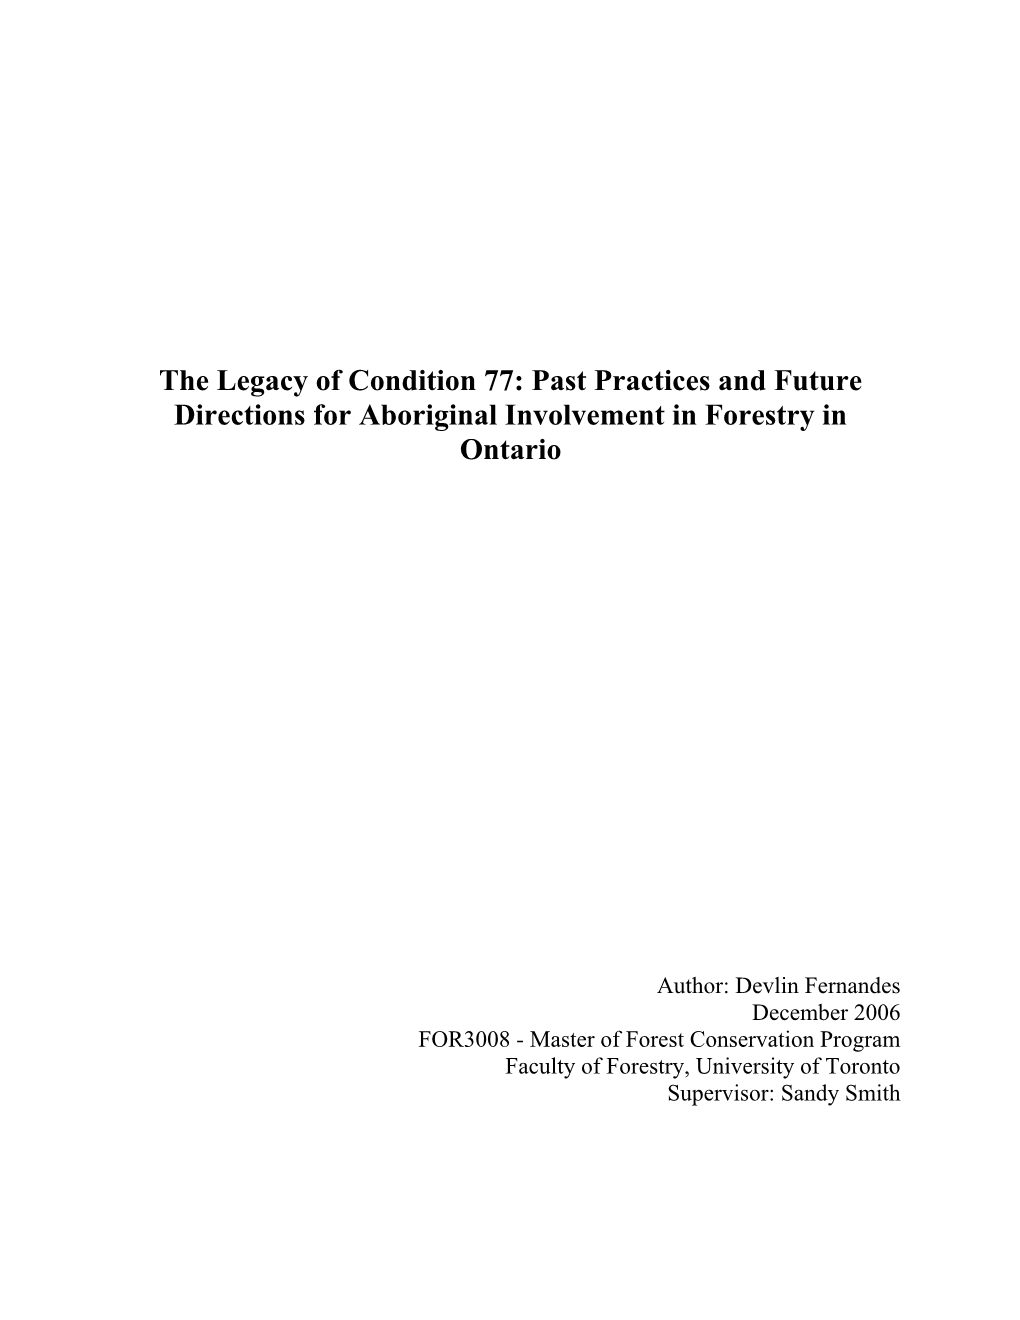 The Legacy of Condition 77: Past Practices and Future Directions for Aboriginal Involvement in Forestry in Ontario